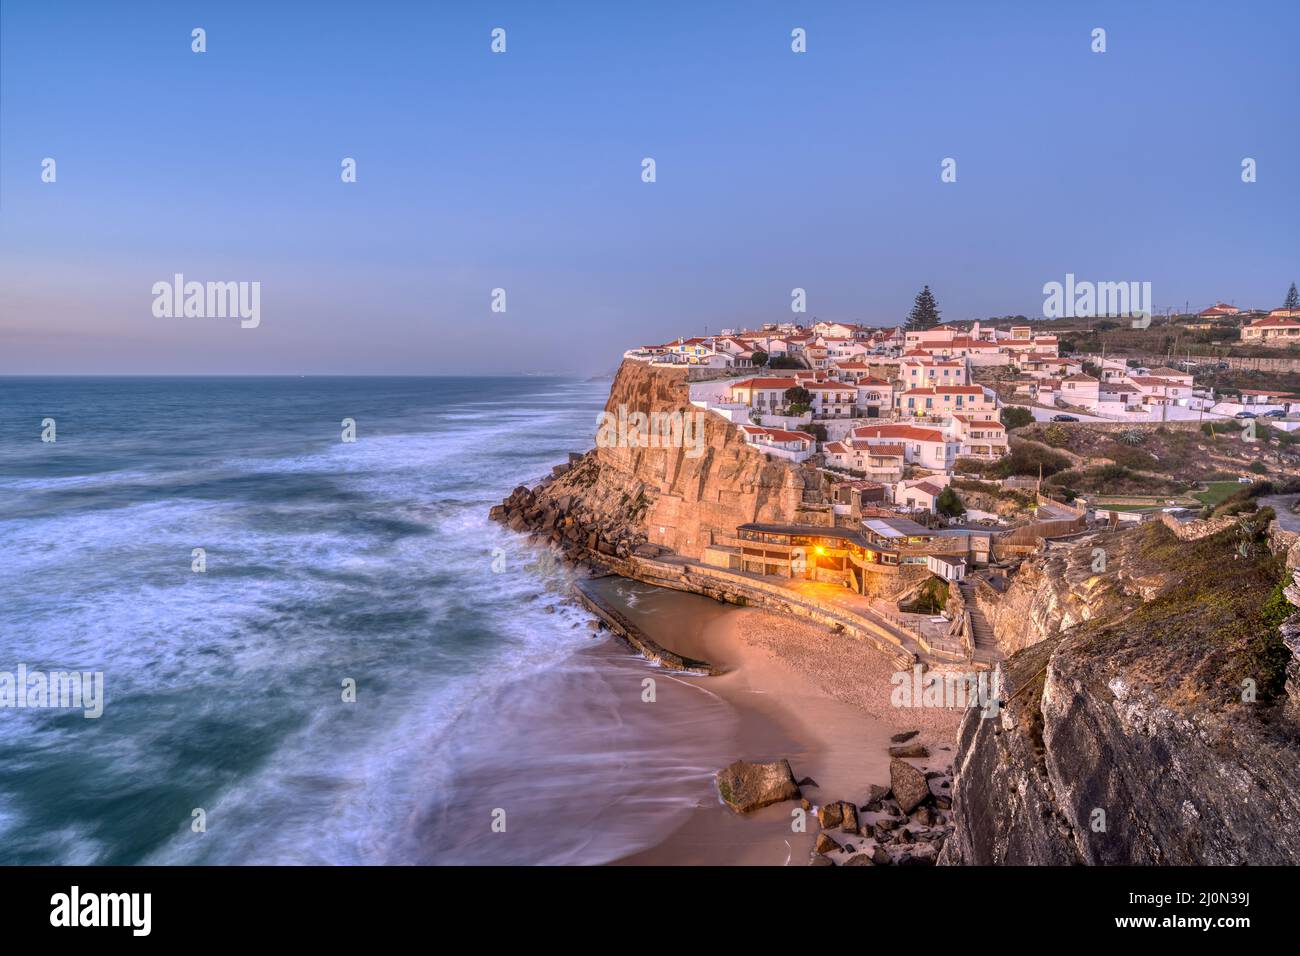 Azenhas do Mar at the portuguese Atlantic coast just after sunset Stock Photo